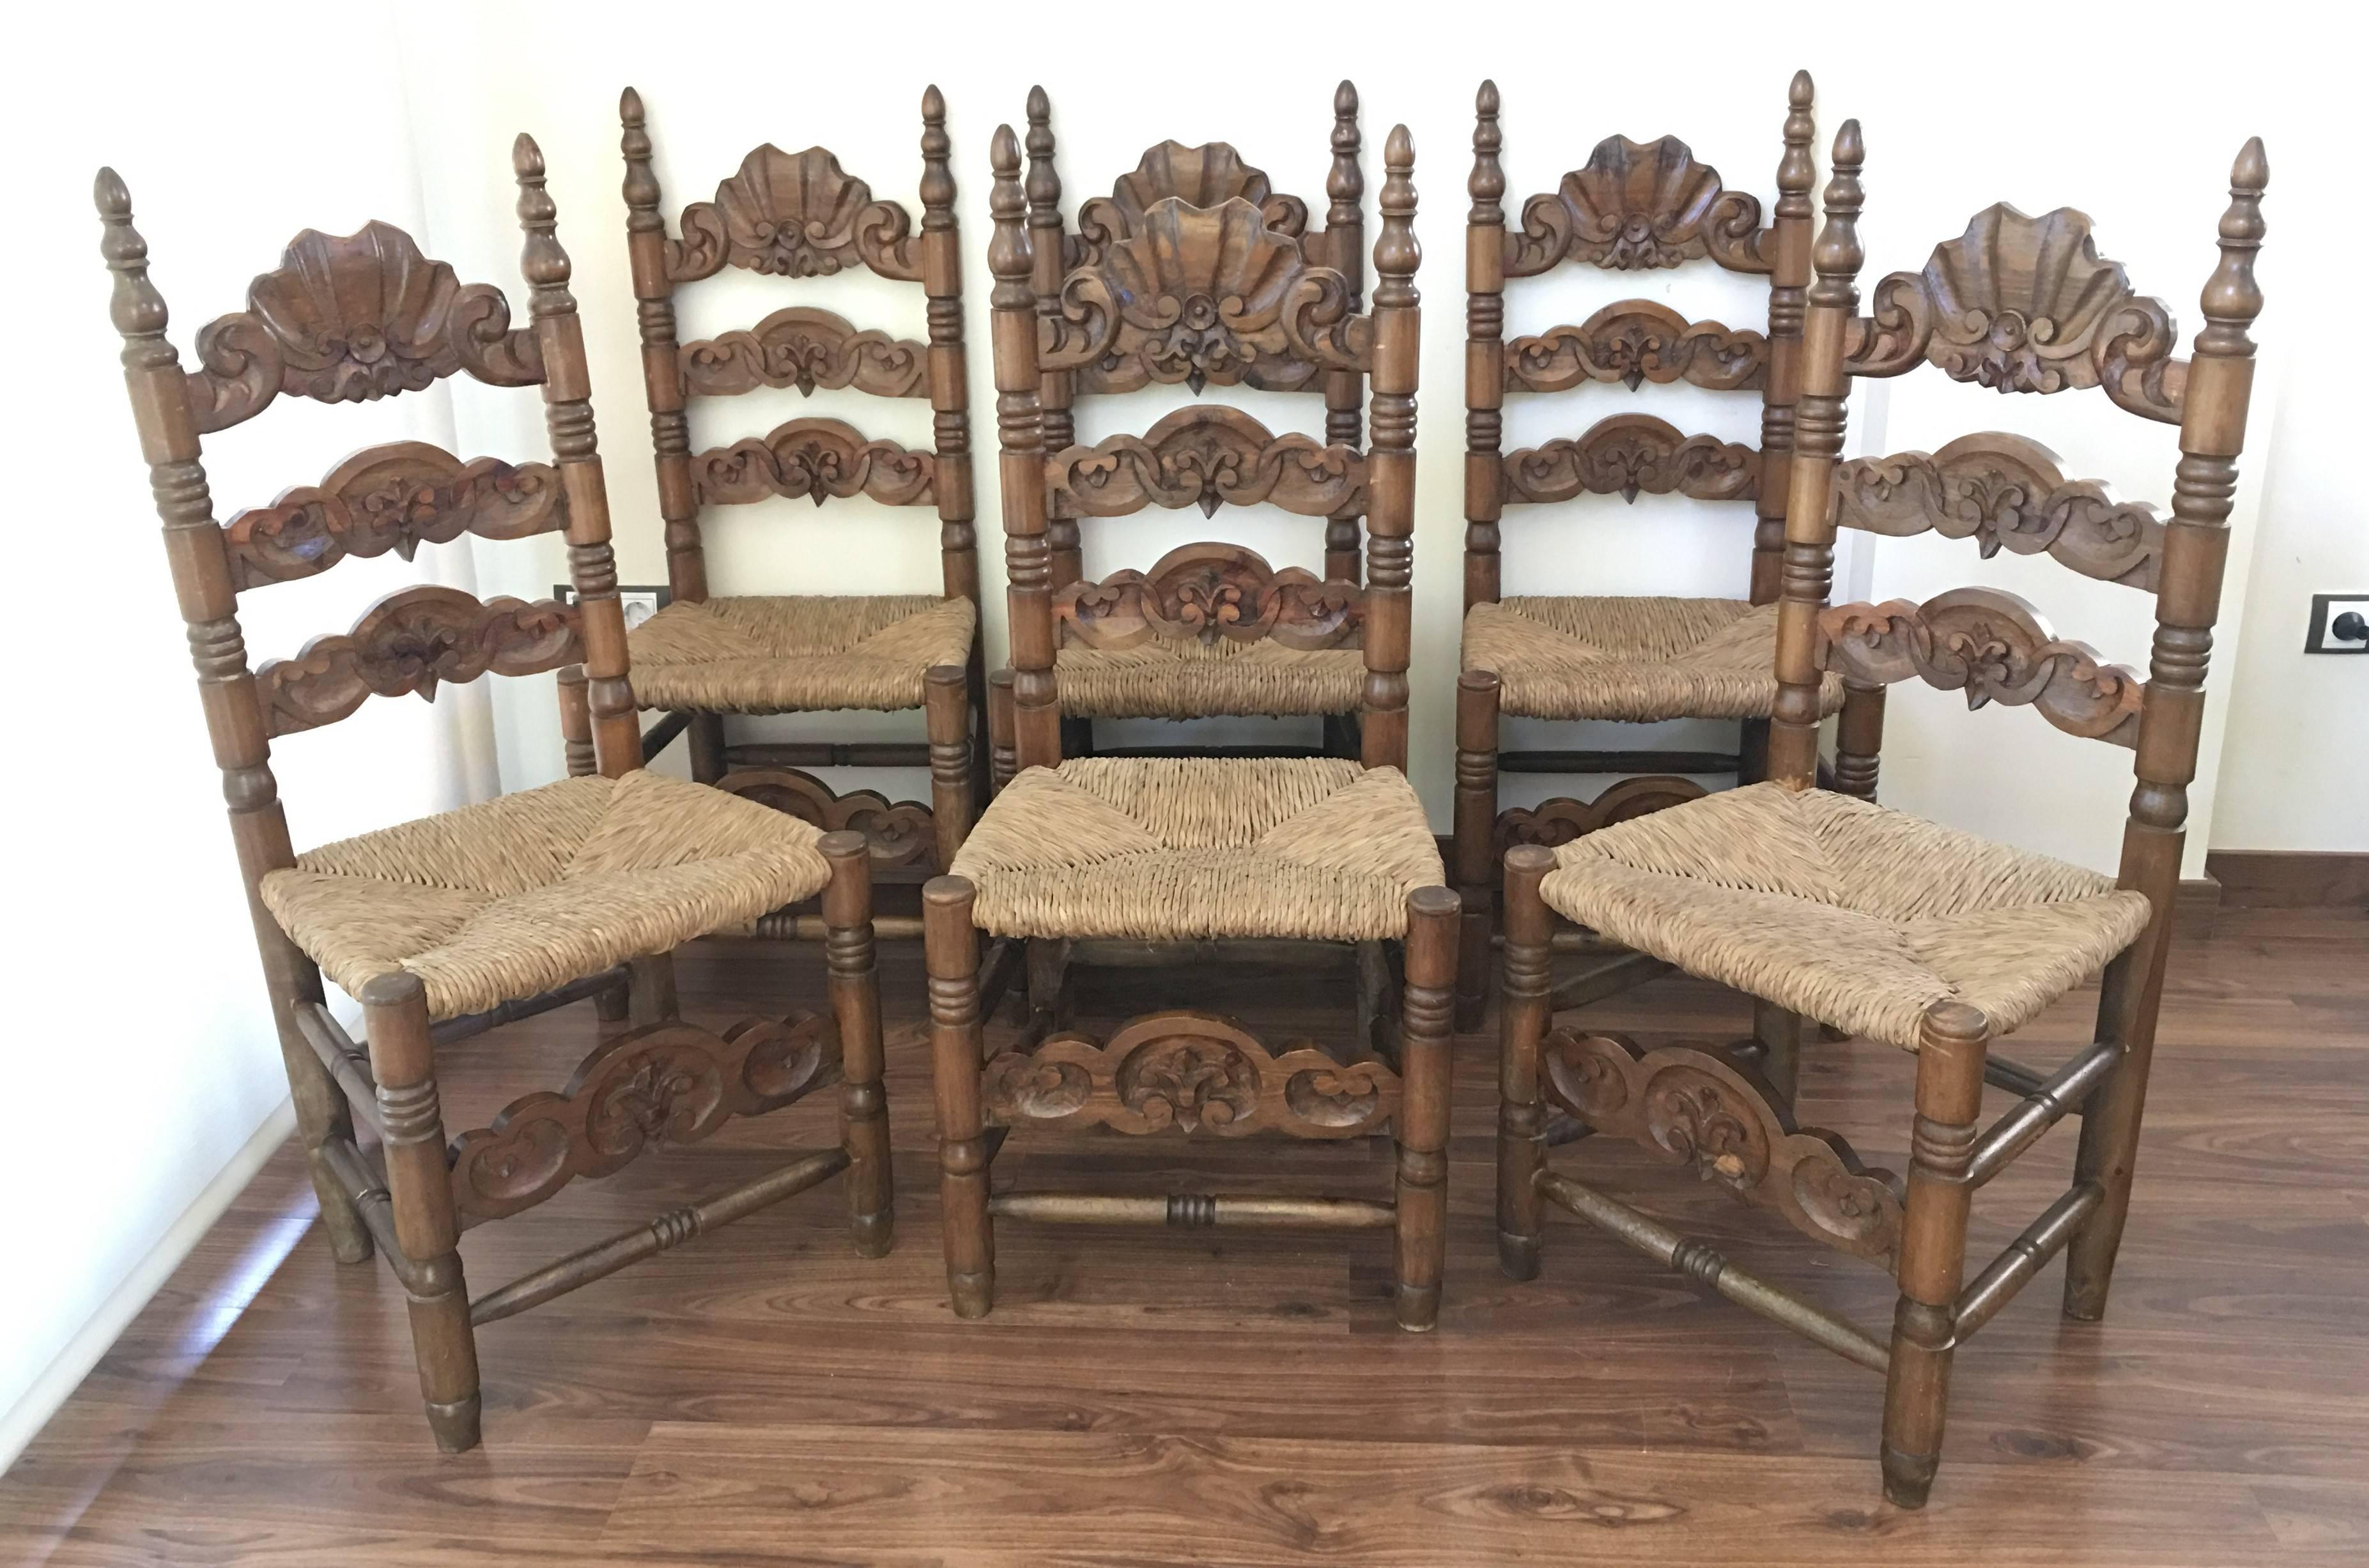 Spanish Set of Six Chairs, Turned and Carved Wood, with Straw Seat of the 20th Century